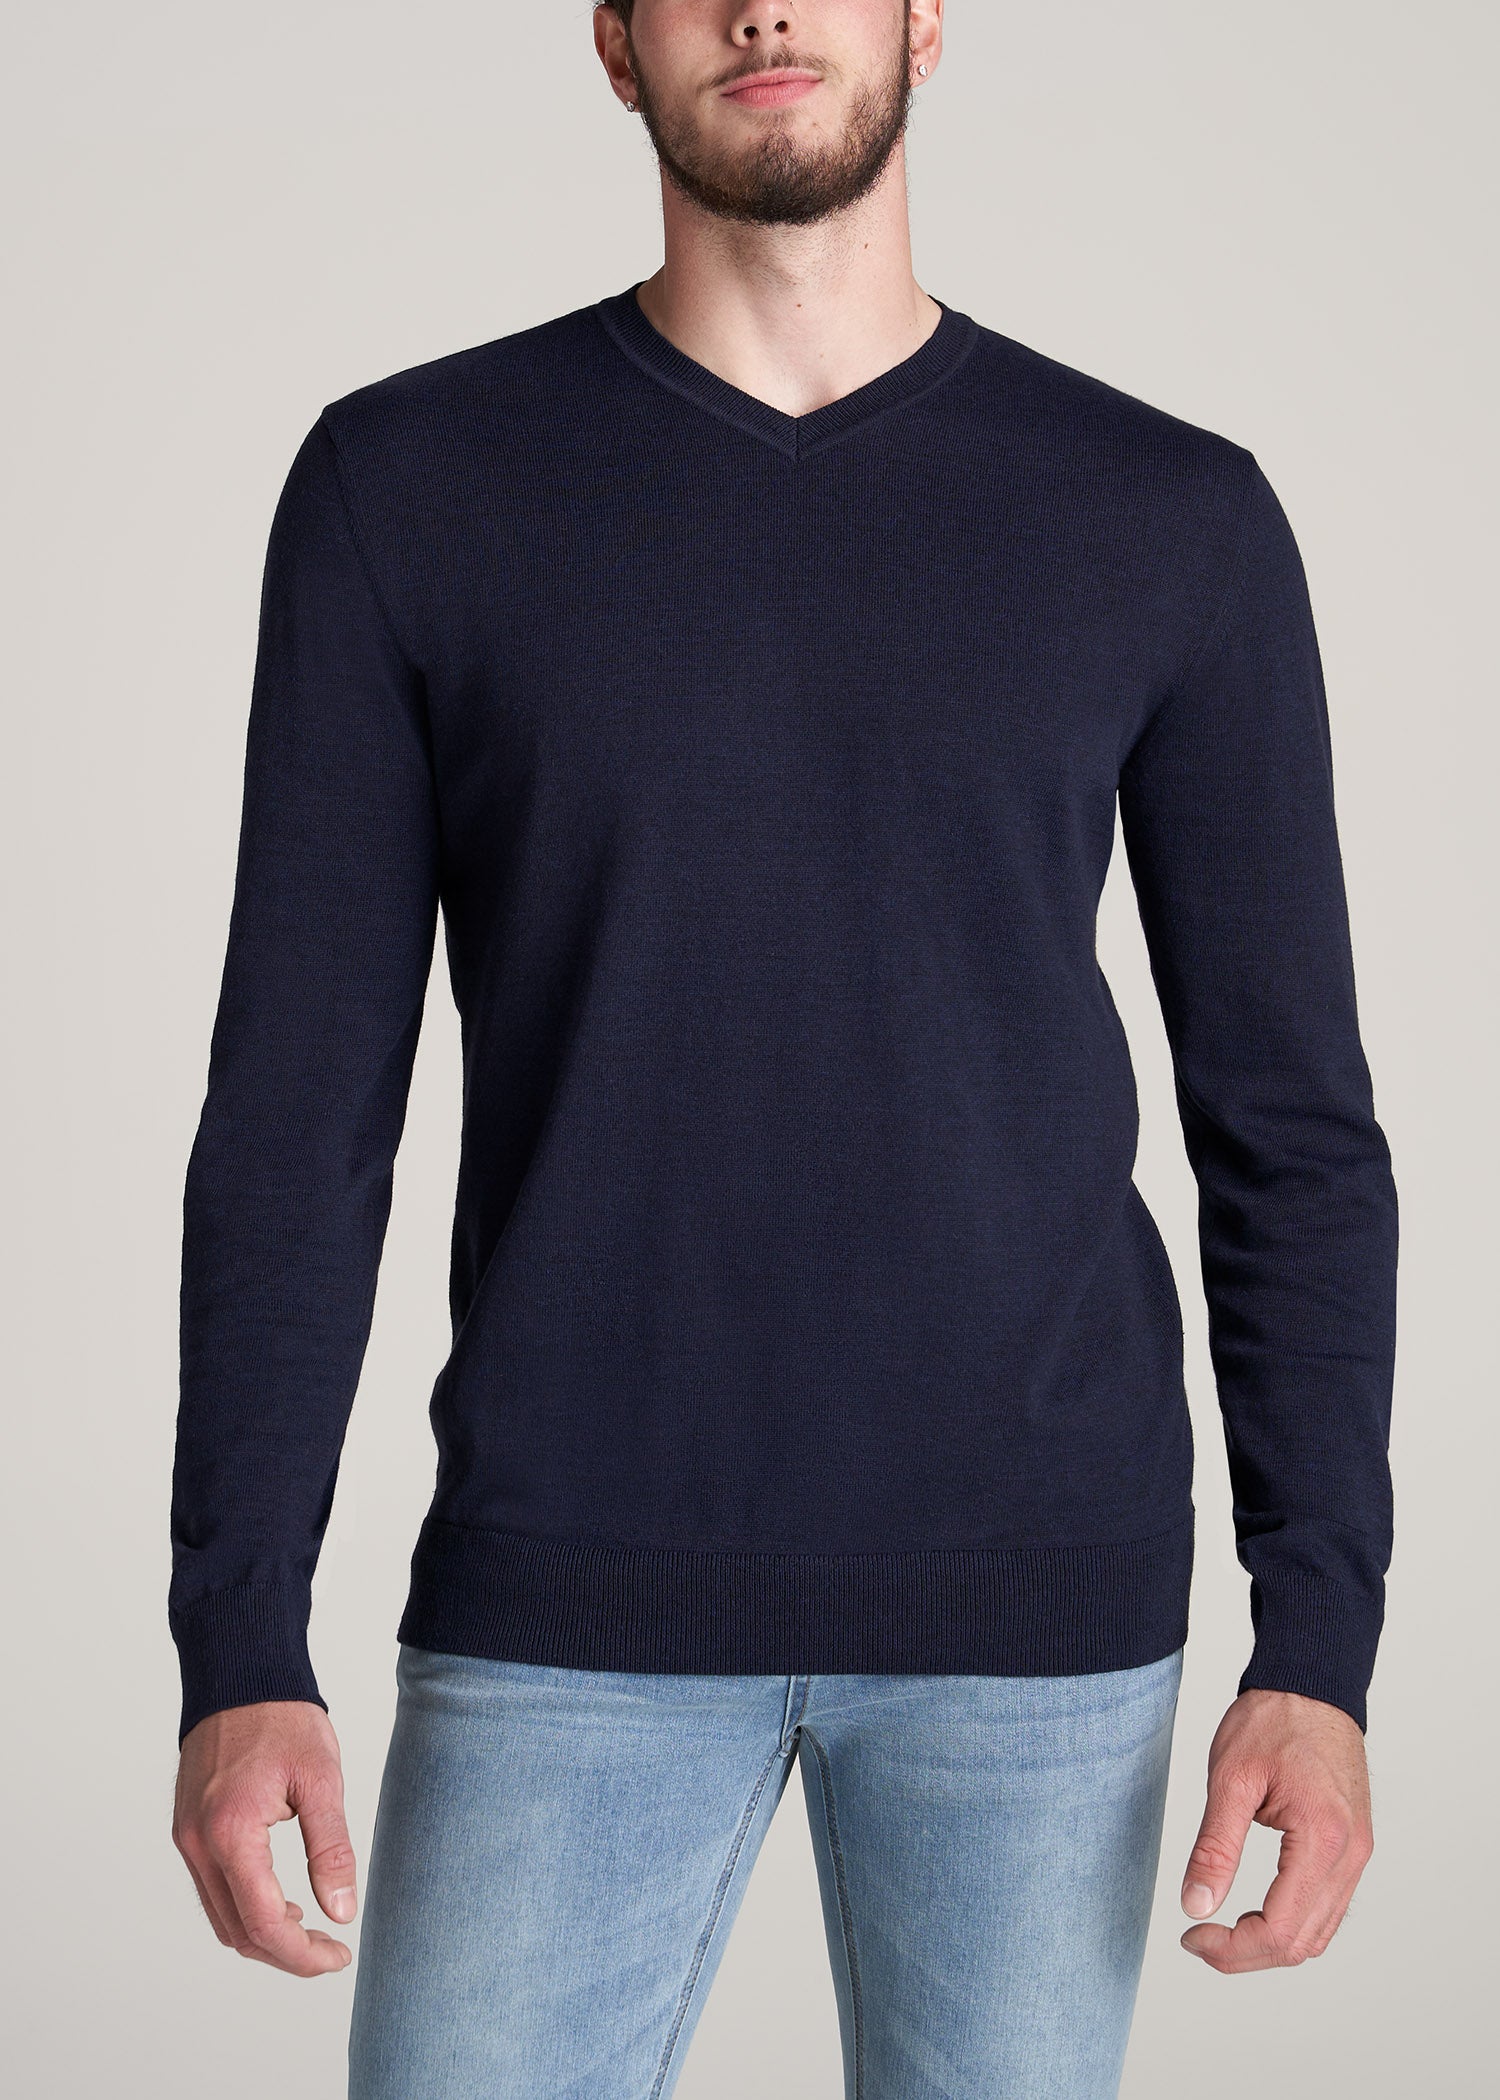       American-Tall-Men-Everyday-V-Neck-Sweater-Patriot-Blue-front